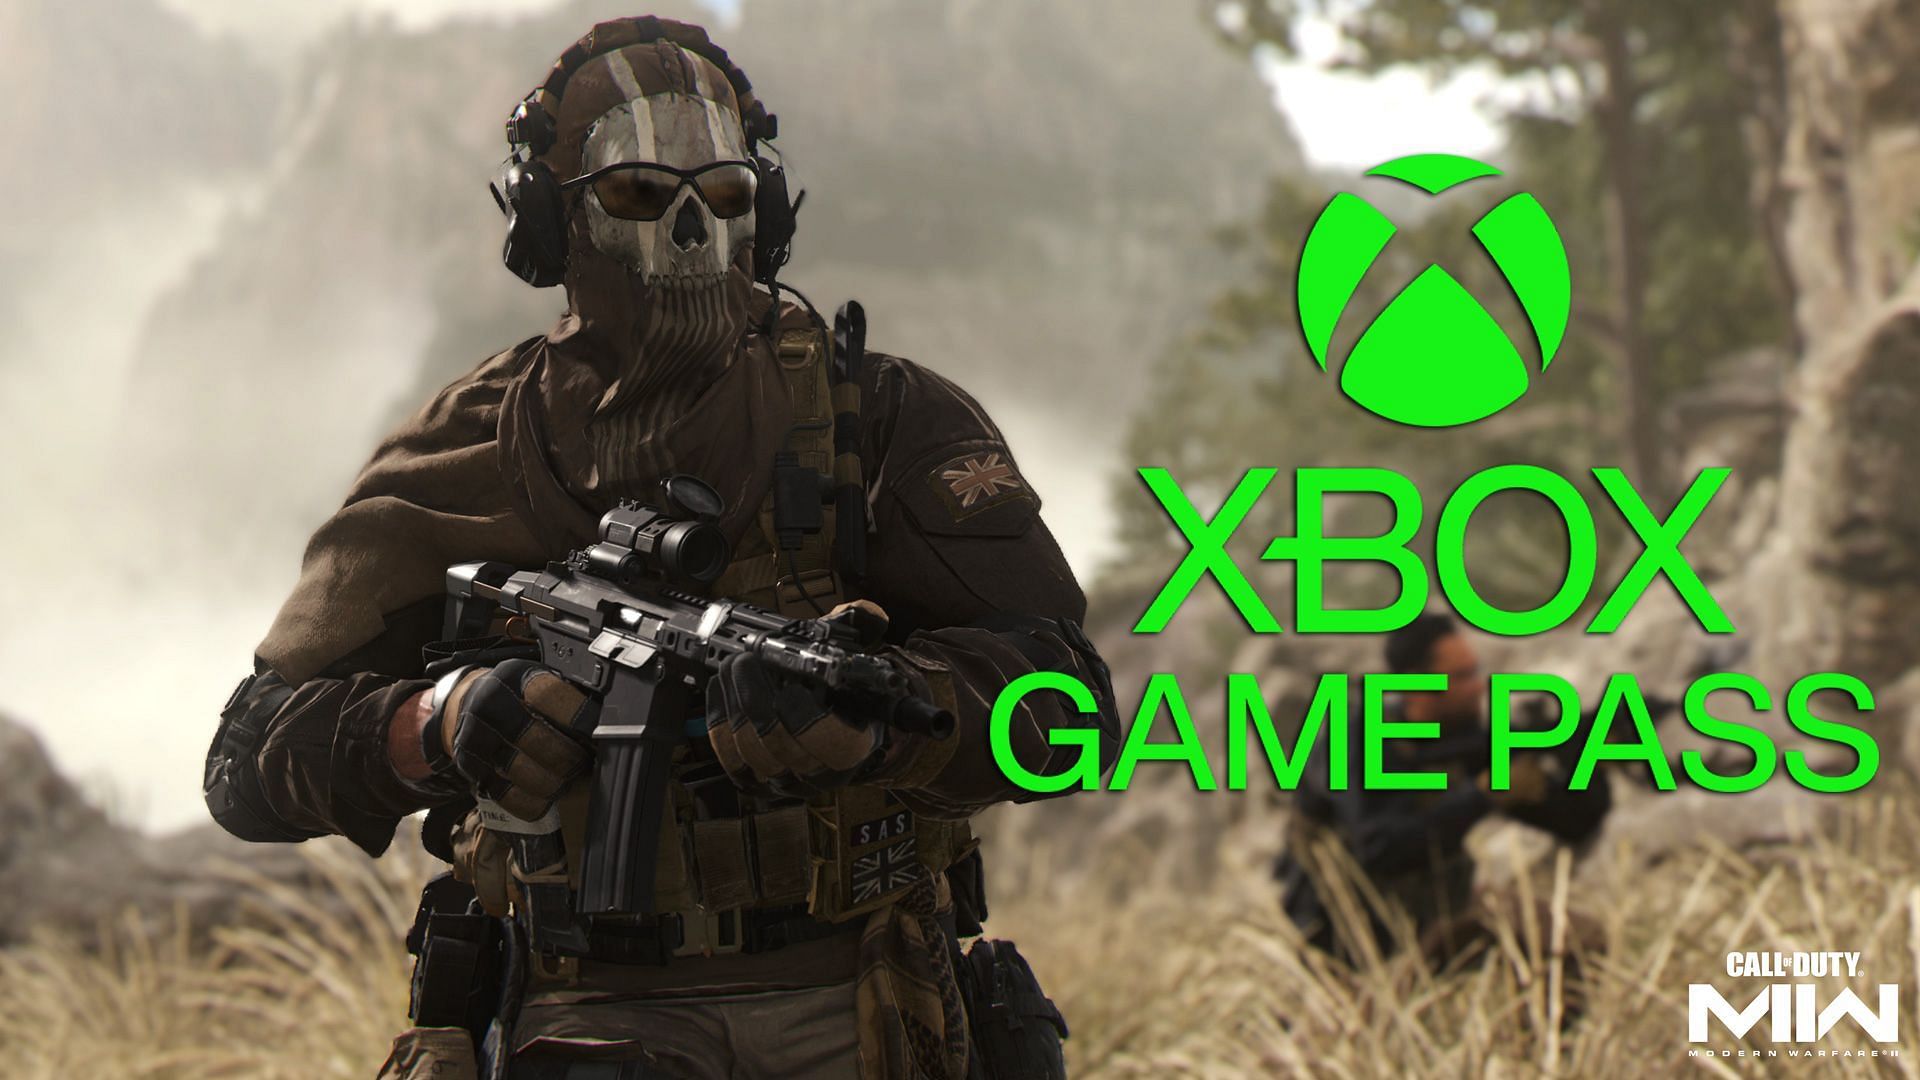 With Call of Duty games confirmed for Xbox Game Pass, what does it mean for future titles?